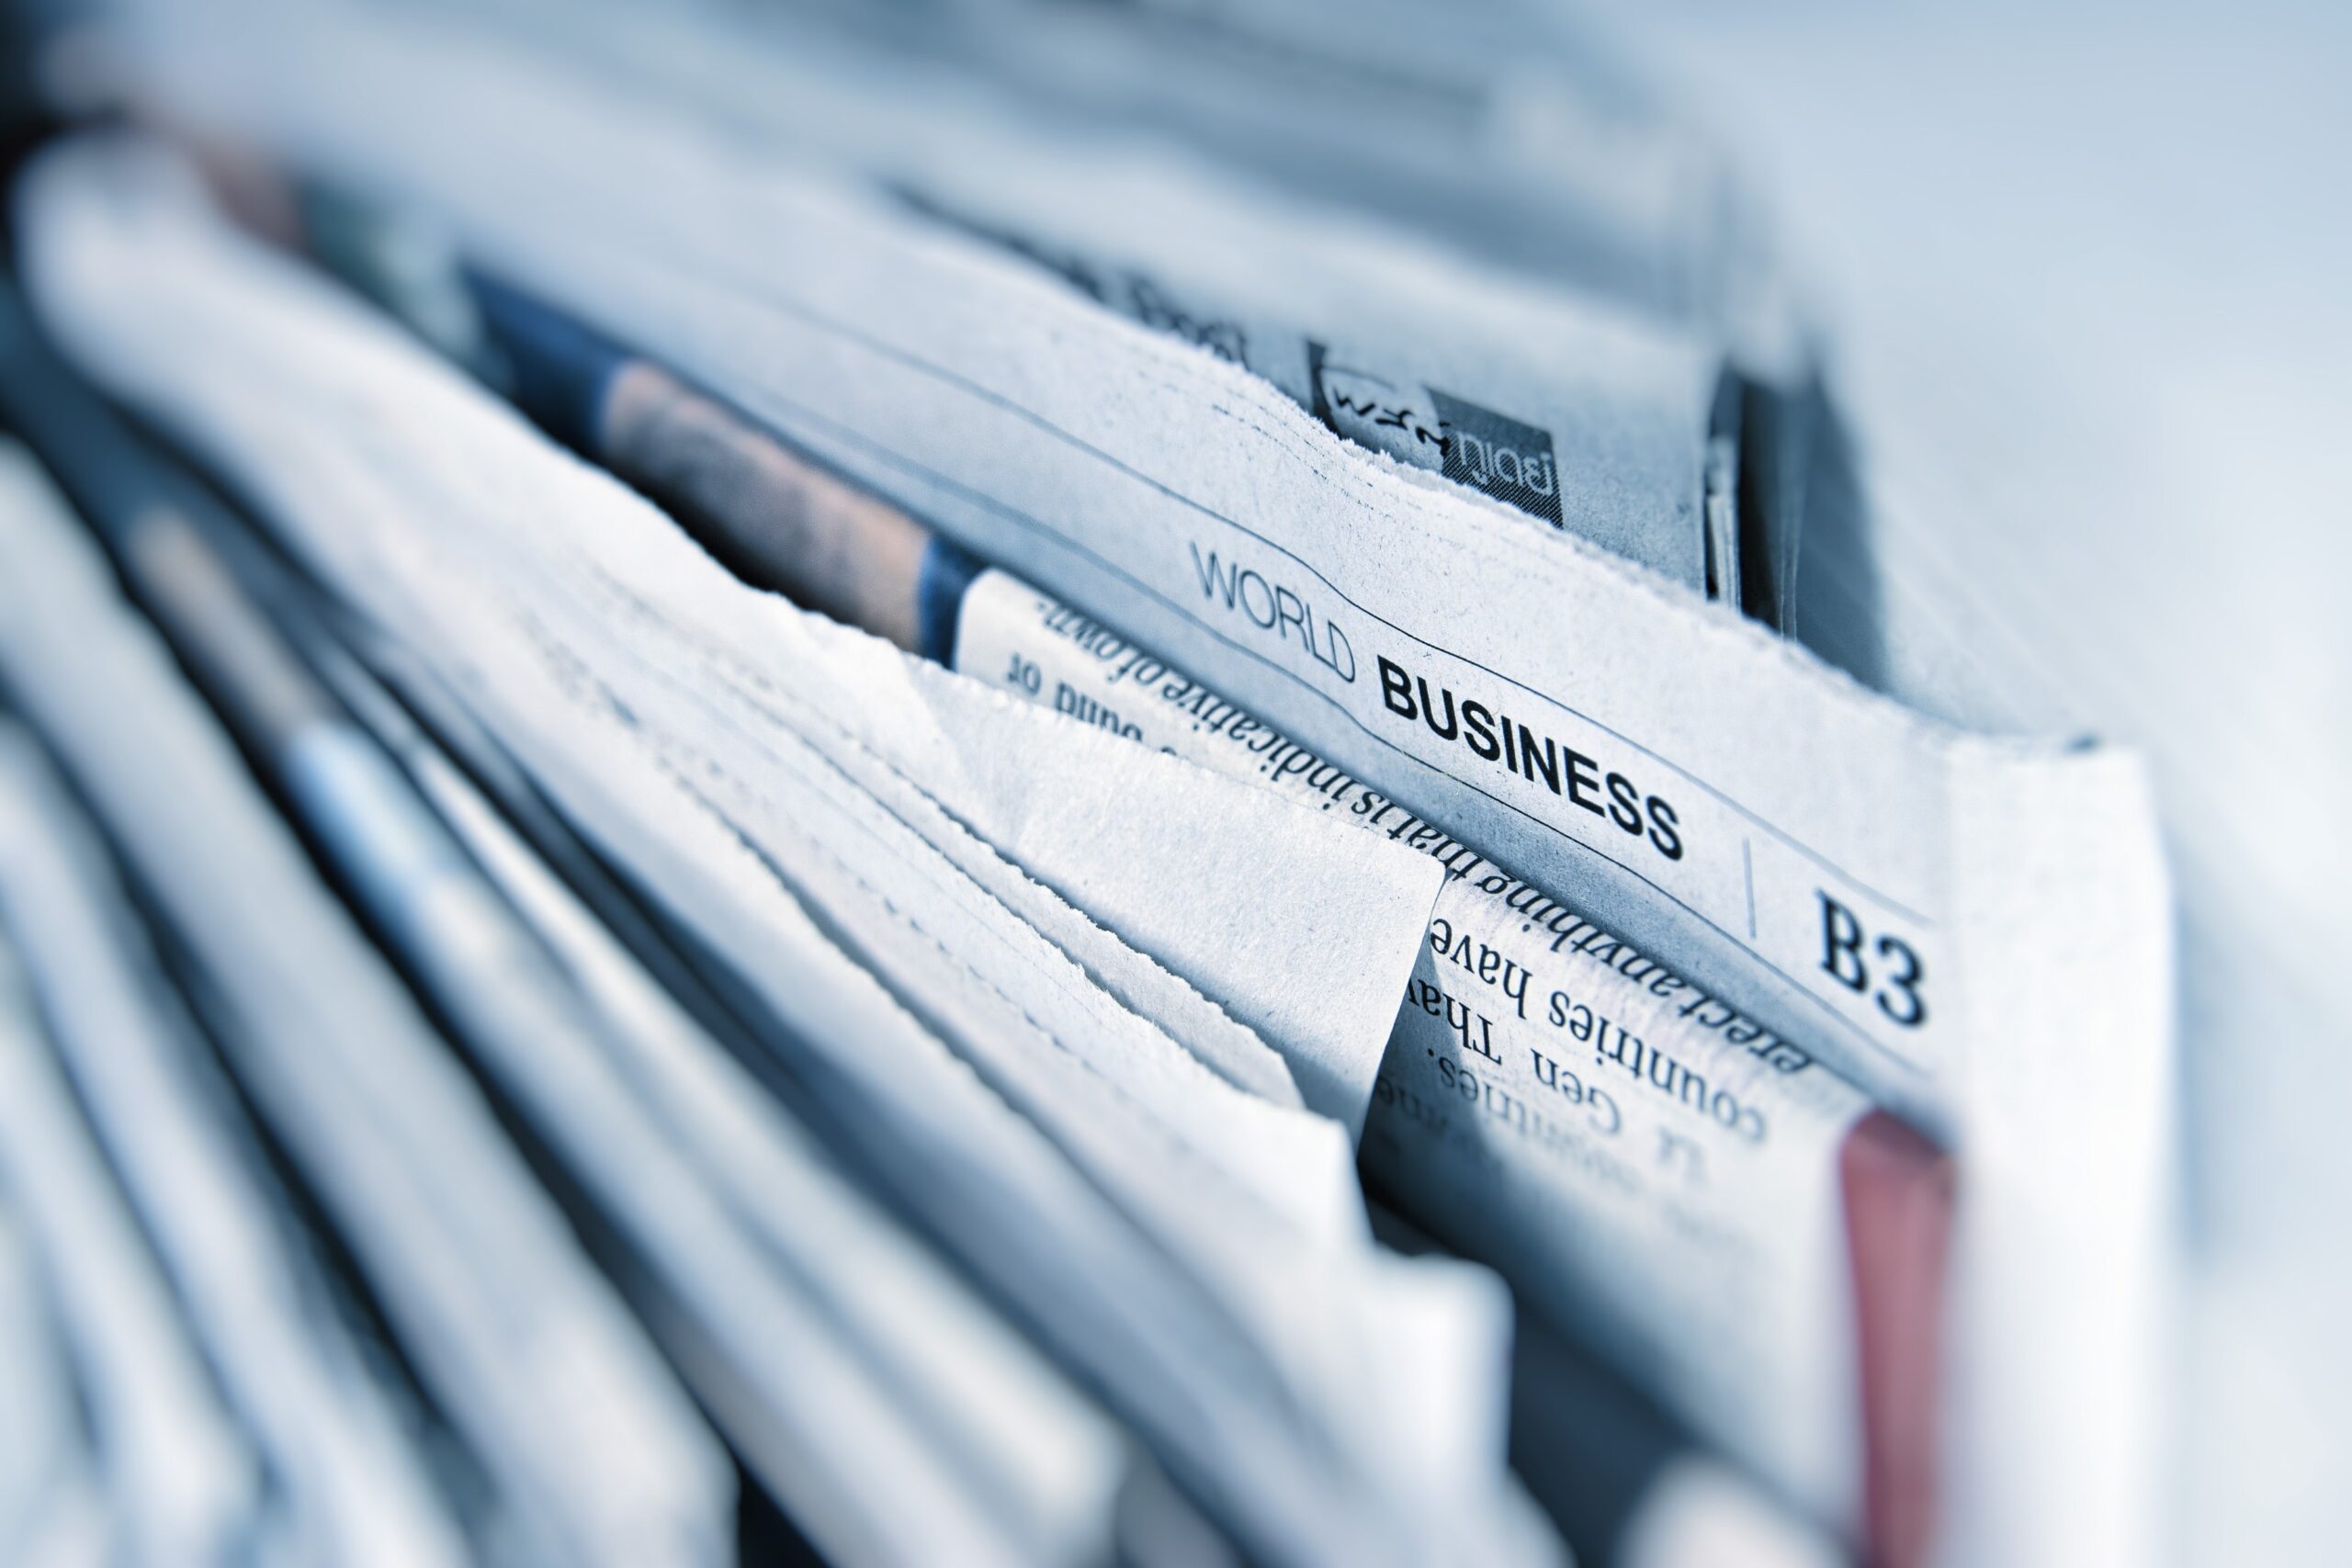 Featured blog post image of a newsletter with the business section highlighted to support Lindsay Smith's regular blog posting about newspaper headlines and real estate.